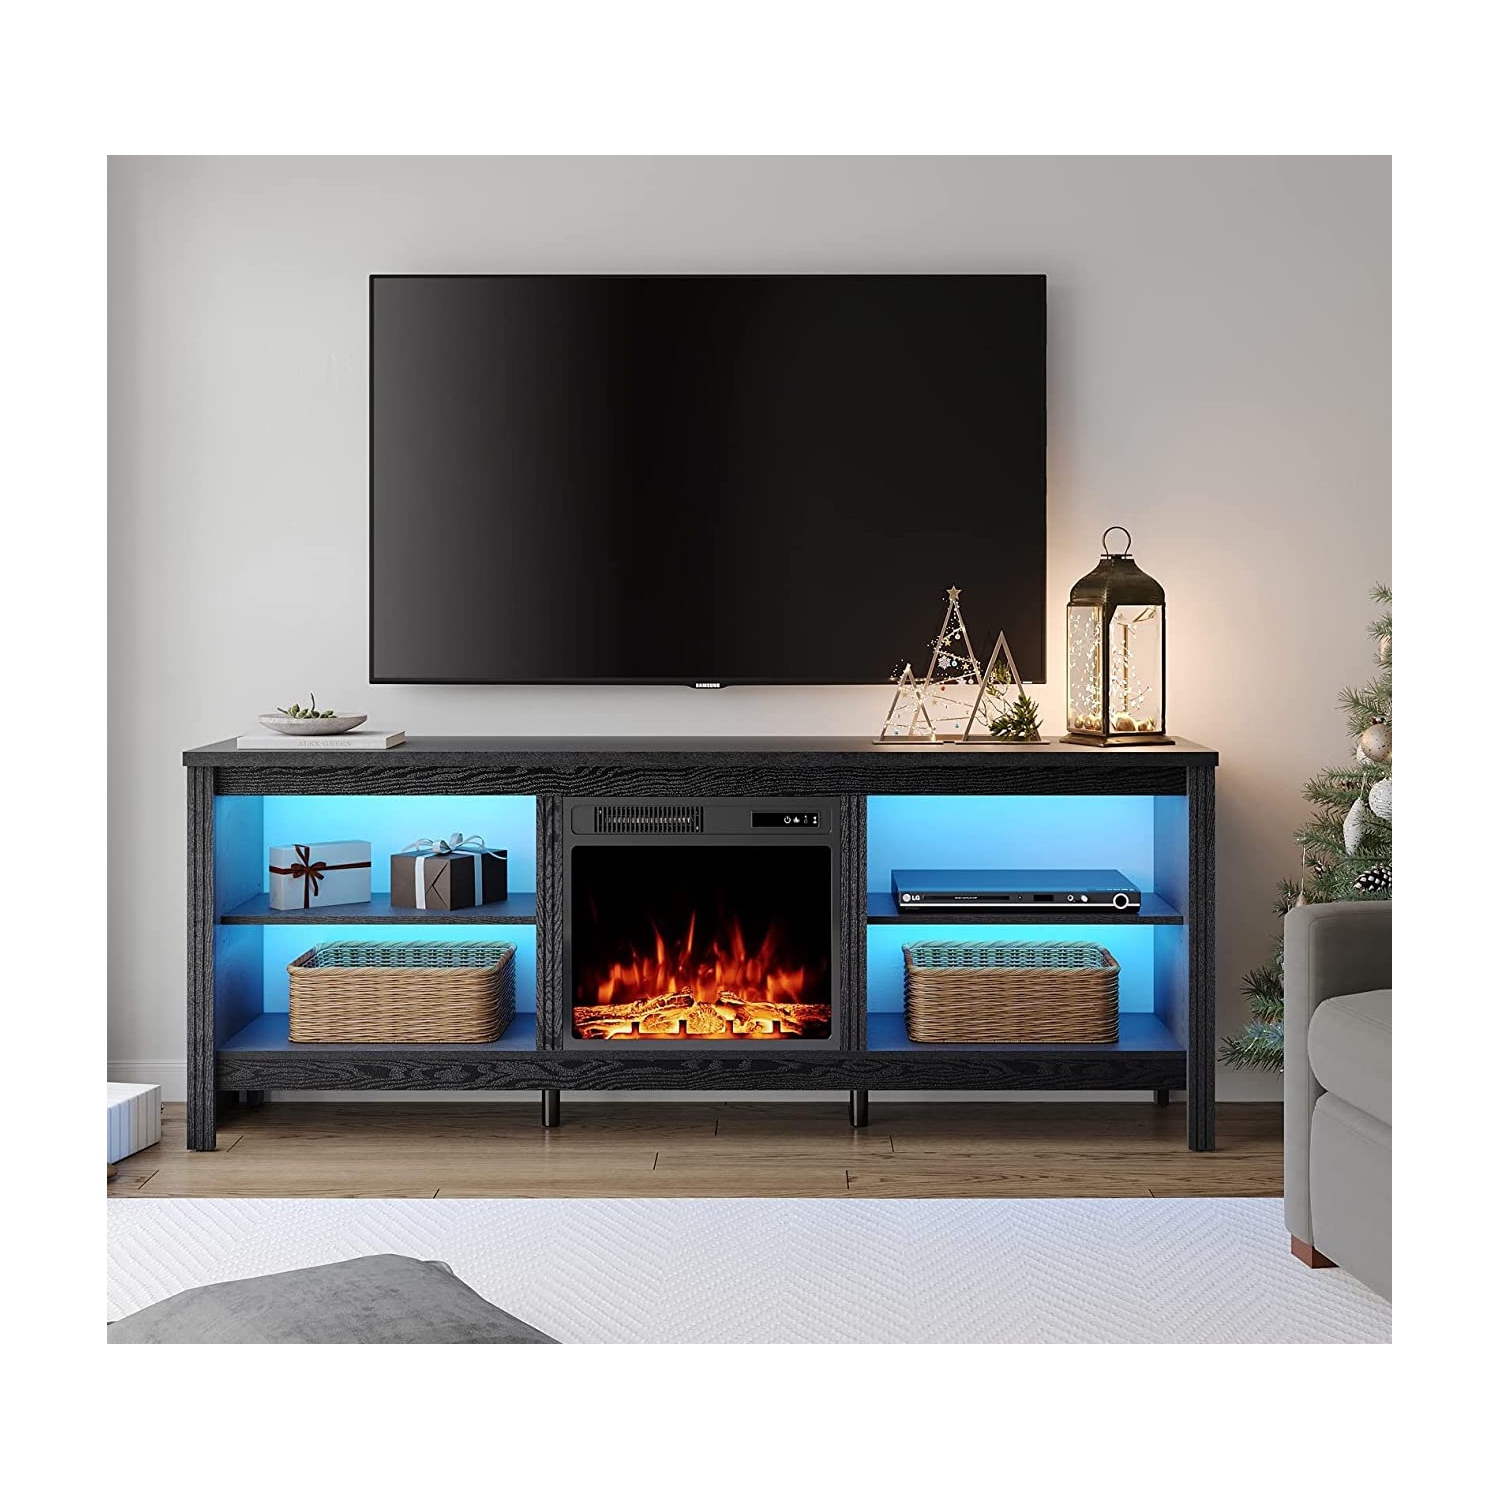 WAMPAT Fireplace TV Stand with LED Lights for 75 Inch TV Entertainment Center, Electric Fire Place Wood TV Console Table with 4 Storagesfor Living Room Bedroom, 70'' Black